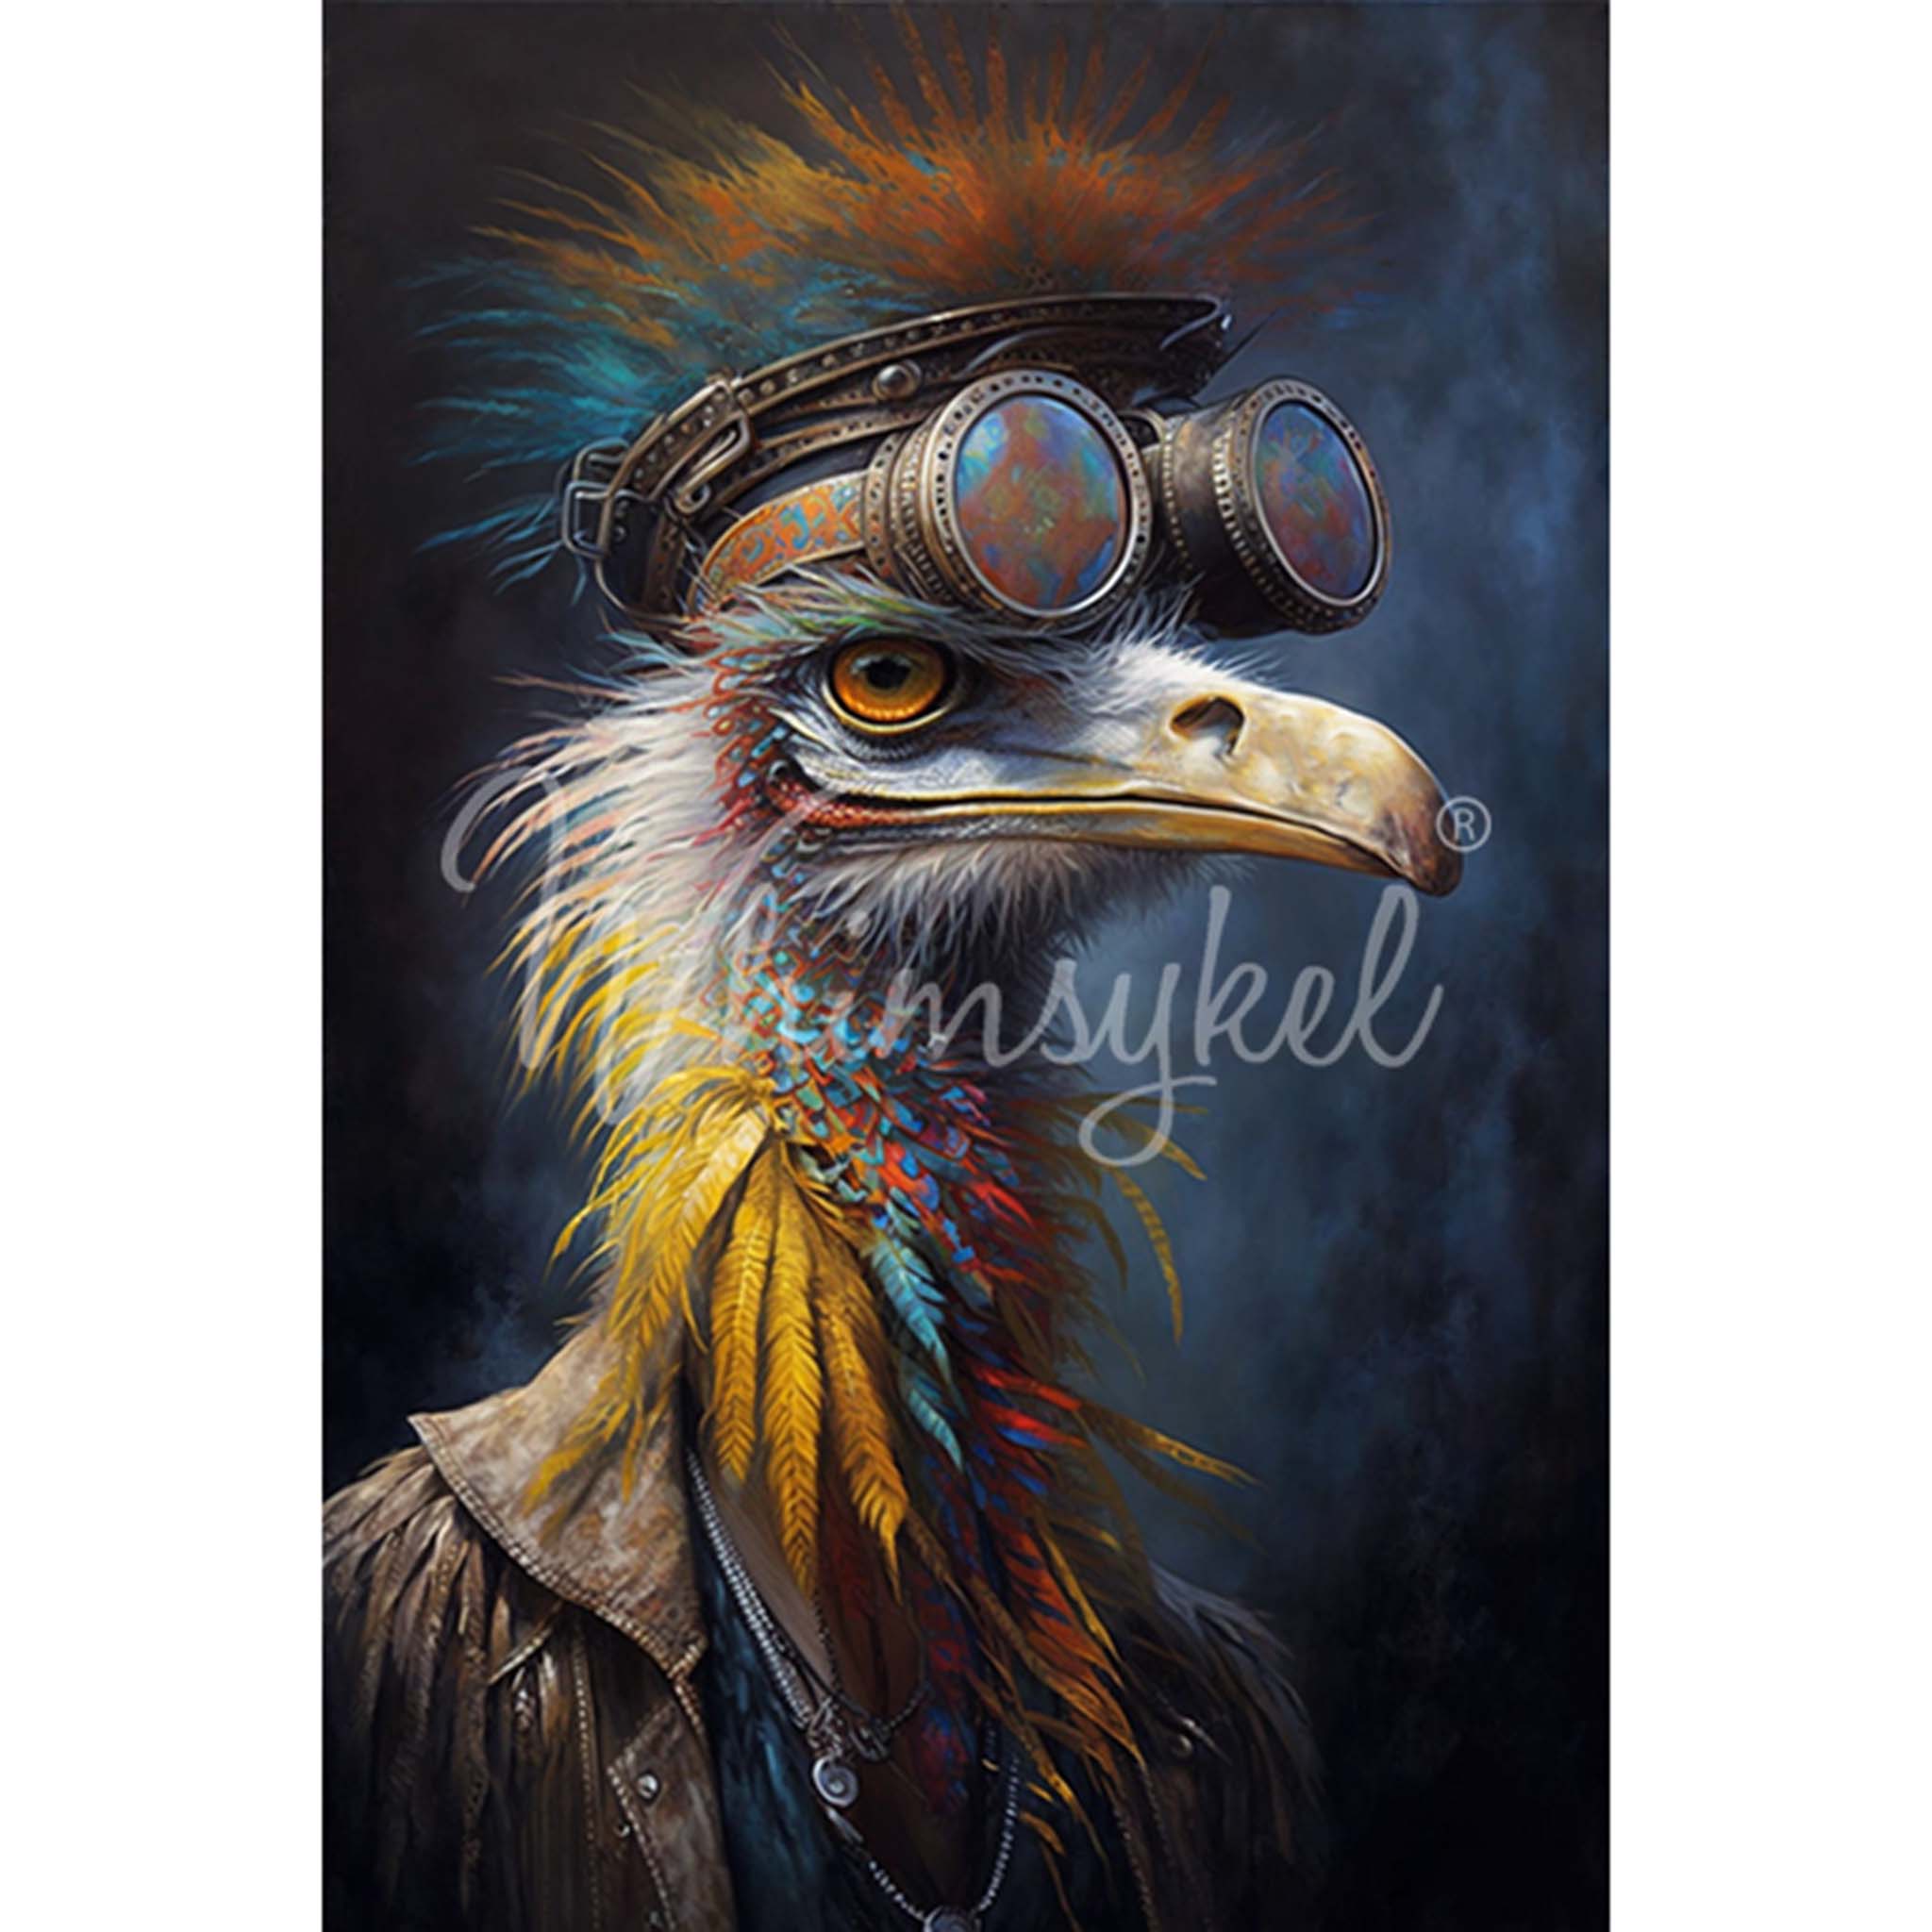 Tissue paper design that features a delightful portrait of a bird that exudes a carefree and bohemian spirit with a leather jacket on and a Steampunk style cap and goggles on its head. White borders are on the sides.